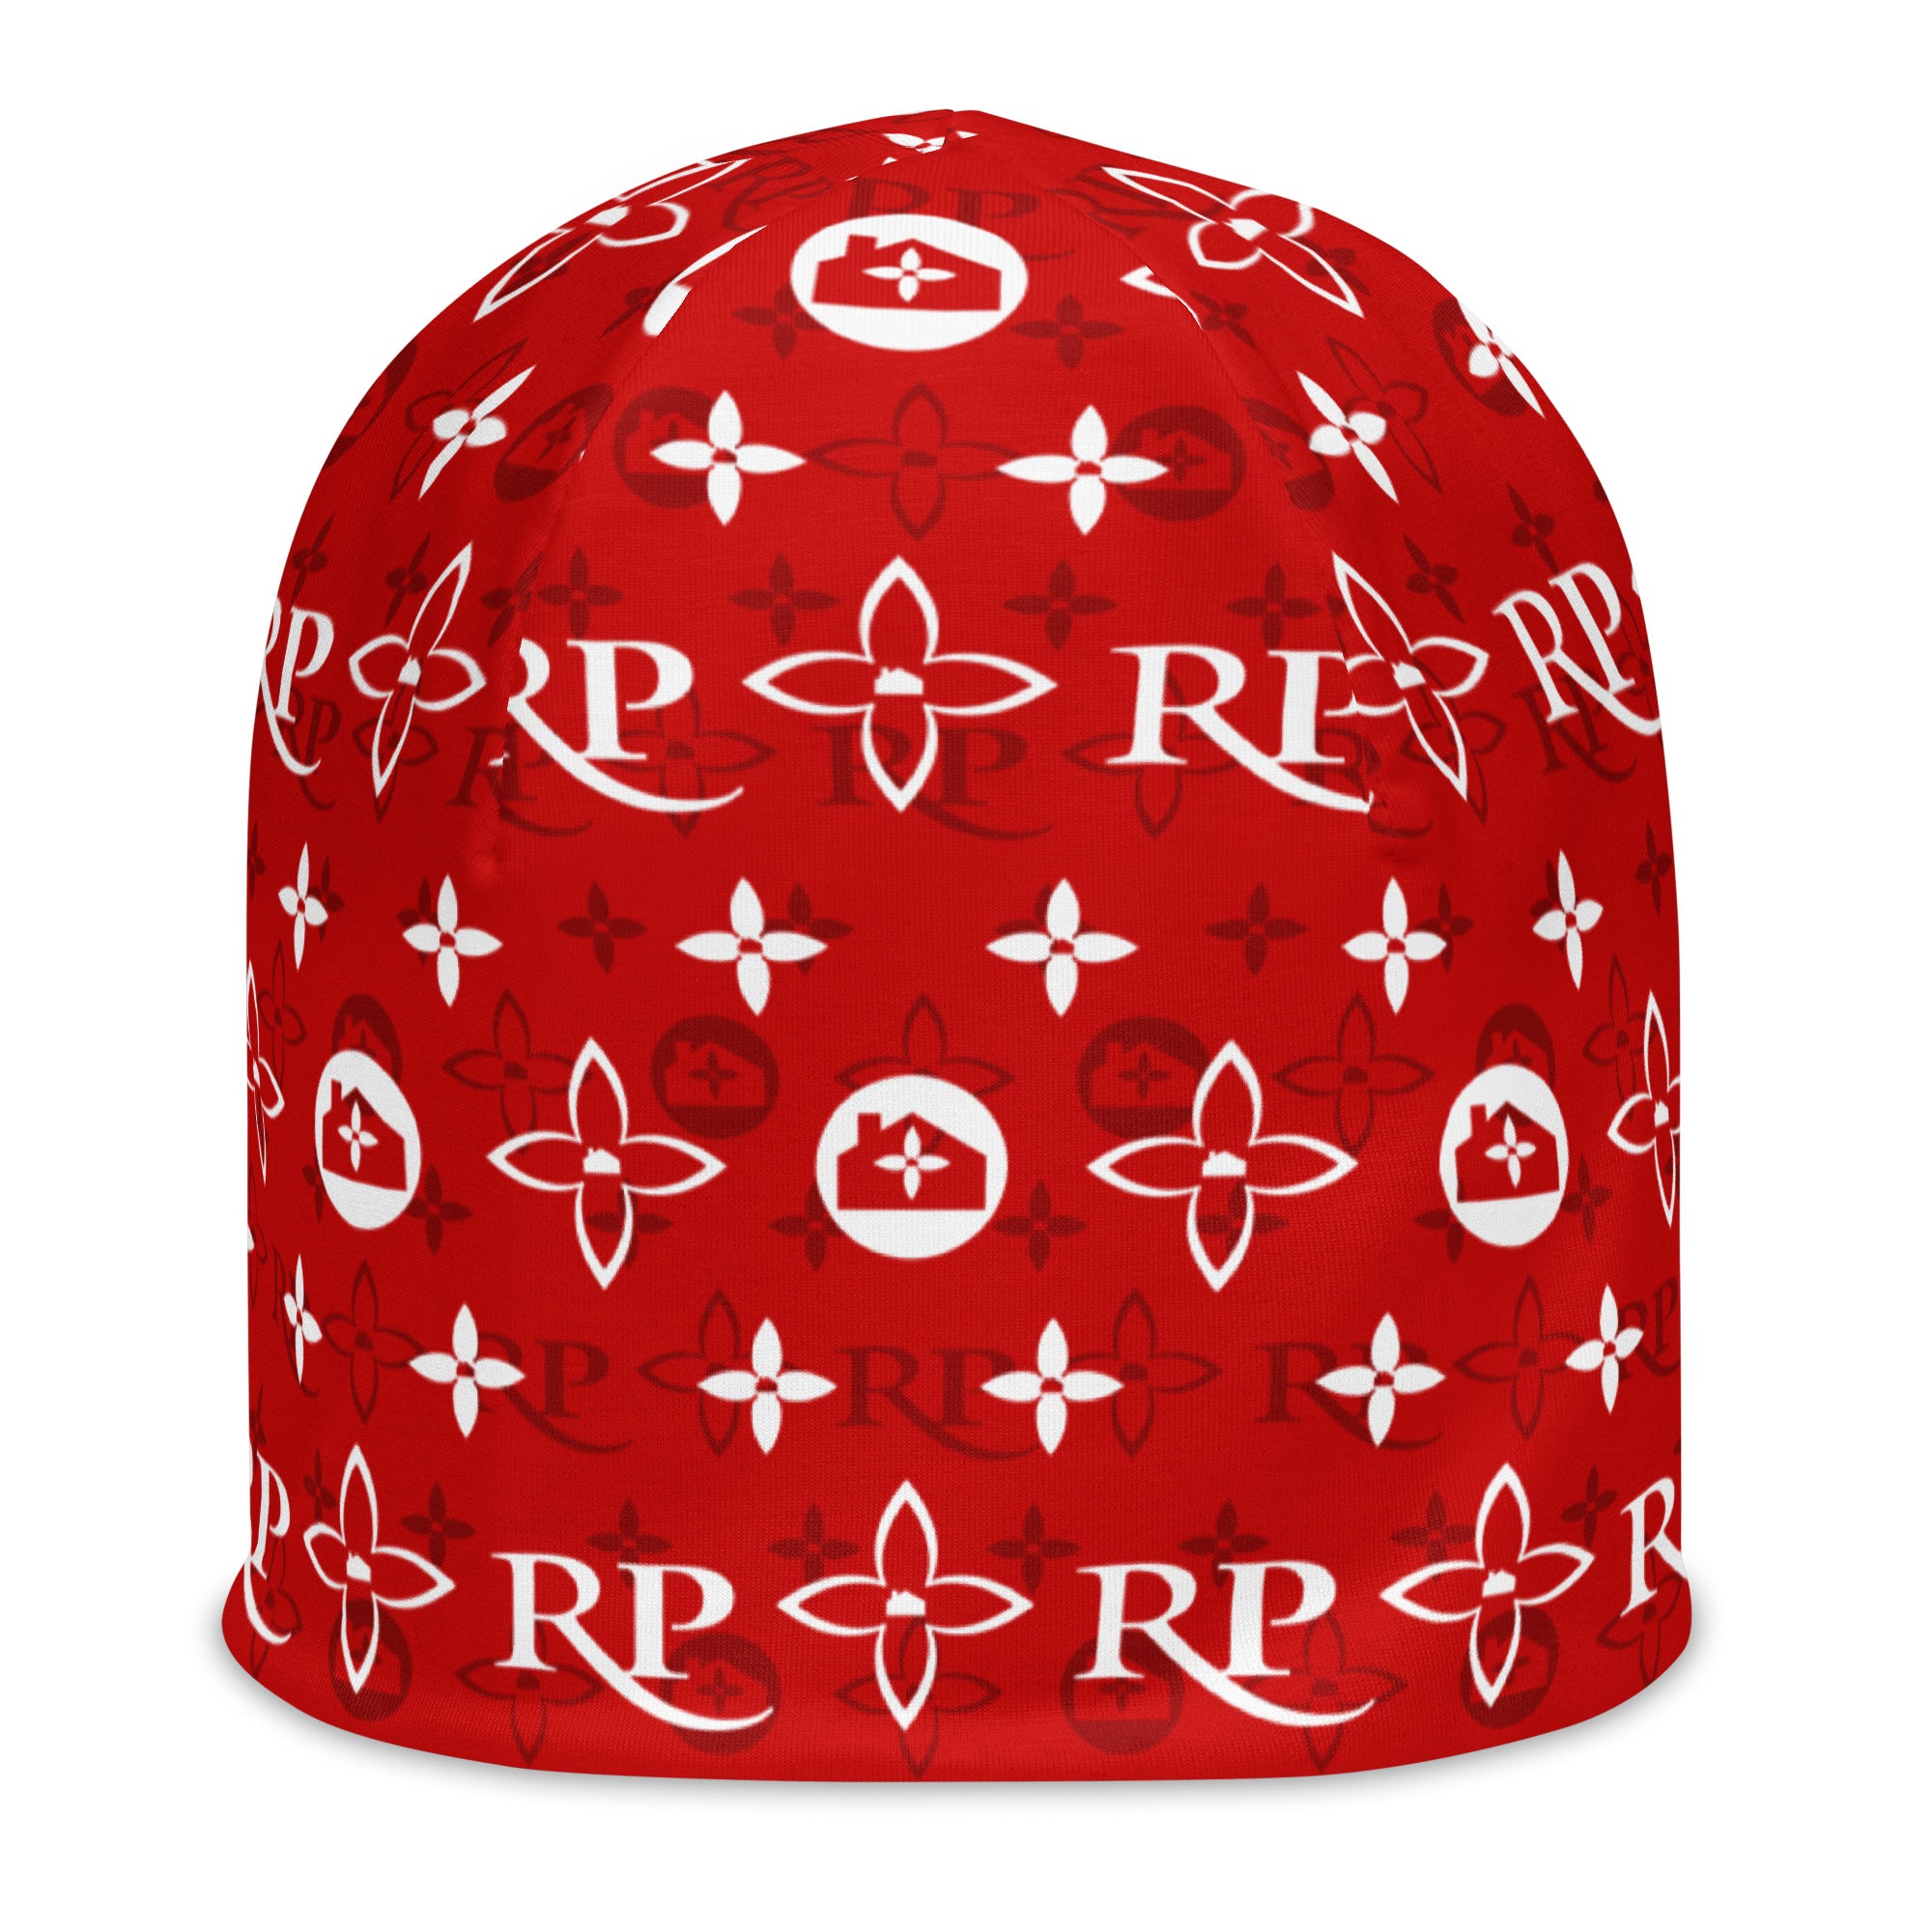 RP Holiday LV-All-Over Print Beanie - Real Team Shop